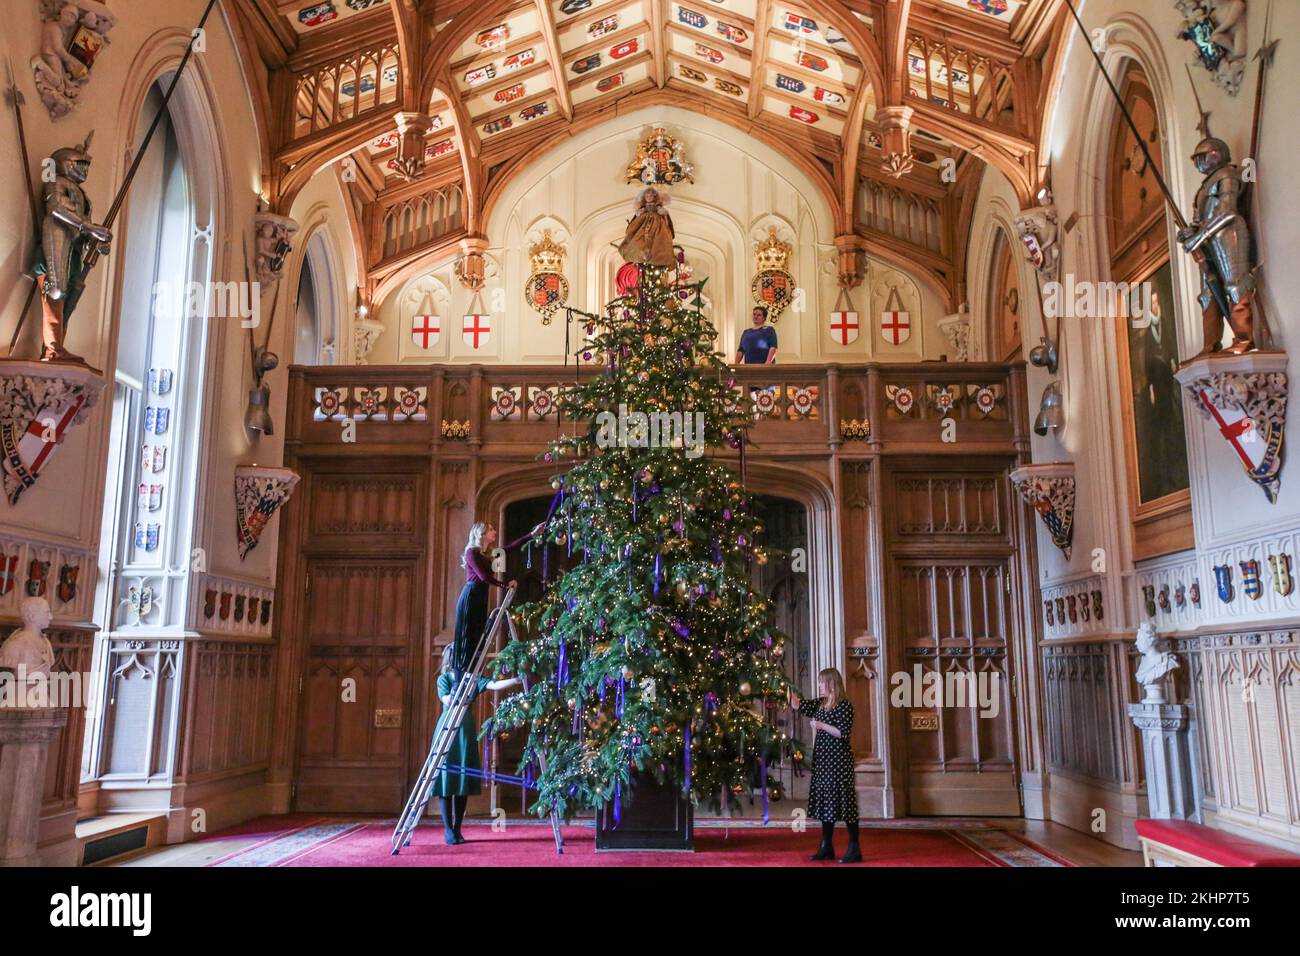 windsor, Berkshire, UK  24 November 2022  Windsor Castle unveiled the Christmas decorations with a 20-foot-high Nordmann Fir tree standing at the end of St George's Hall, felled from nearby Windsor Great Park and dressed with hundreds of iridescent ornaments. Credit: Paul Quezada-Neiman/Alamy Live News Stock Photo